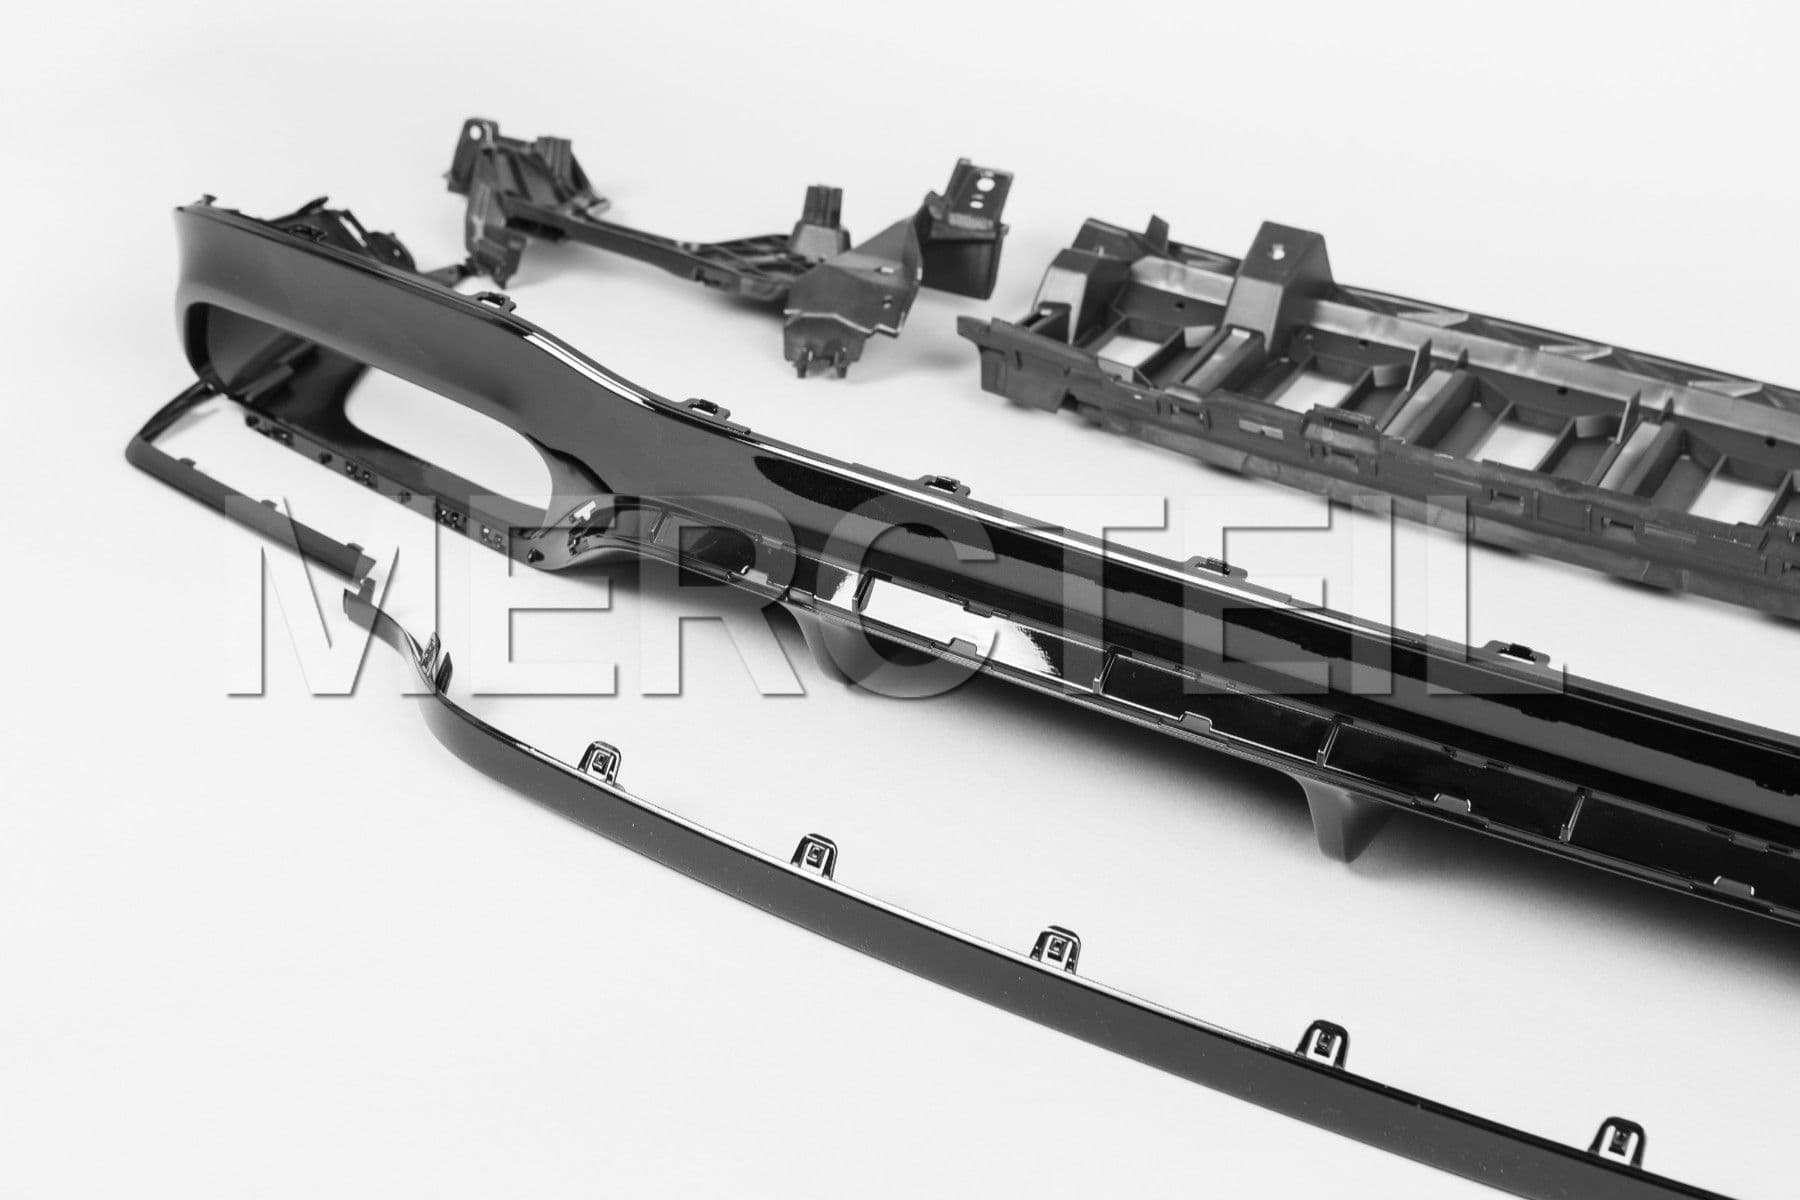 E63 AMG Rear Diffuser Genuine Mercedes Benz (part number: A2138854401)